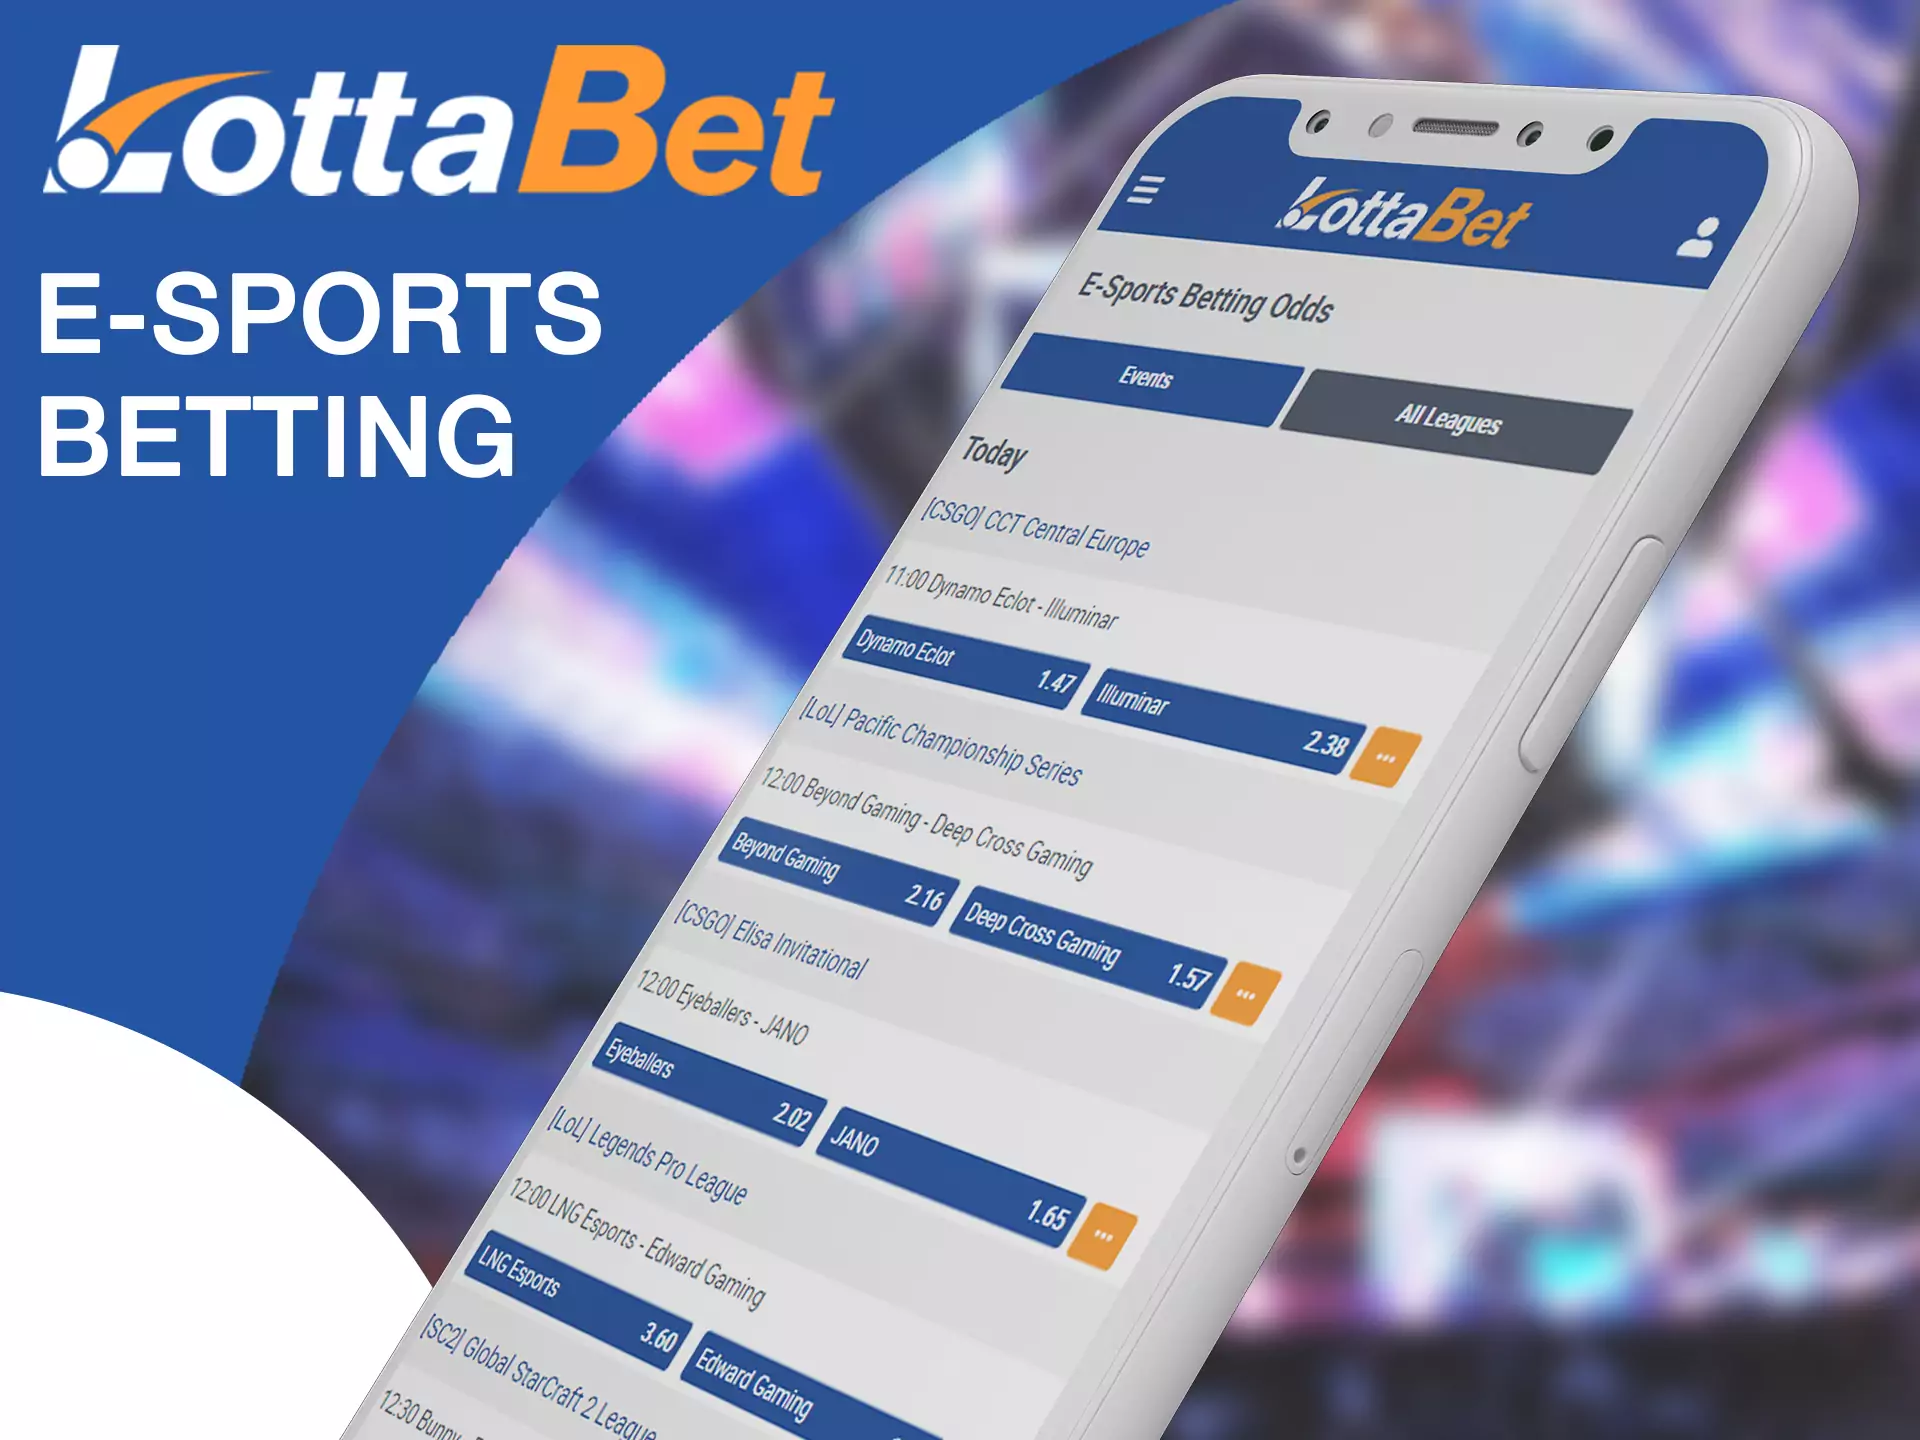 Watch most intresting esports matches in LottaBet app.